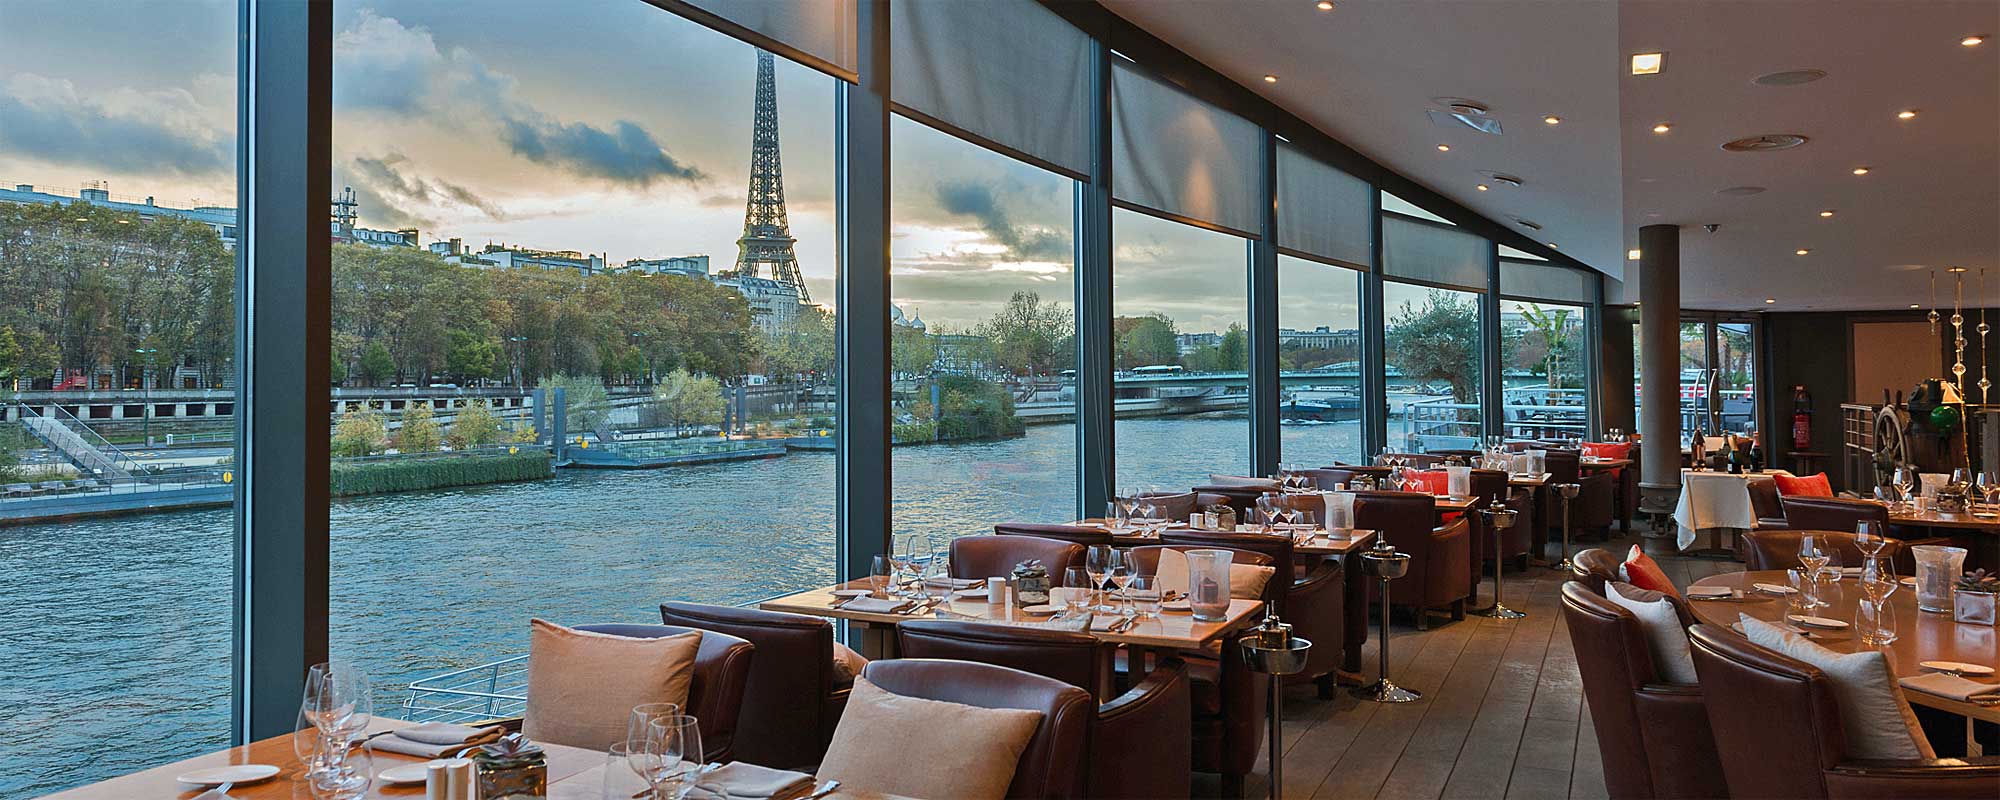 Restaurant with a view of the Seine River